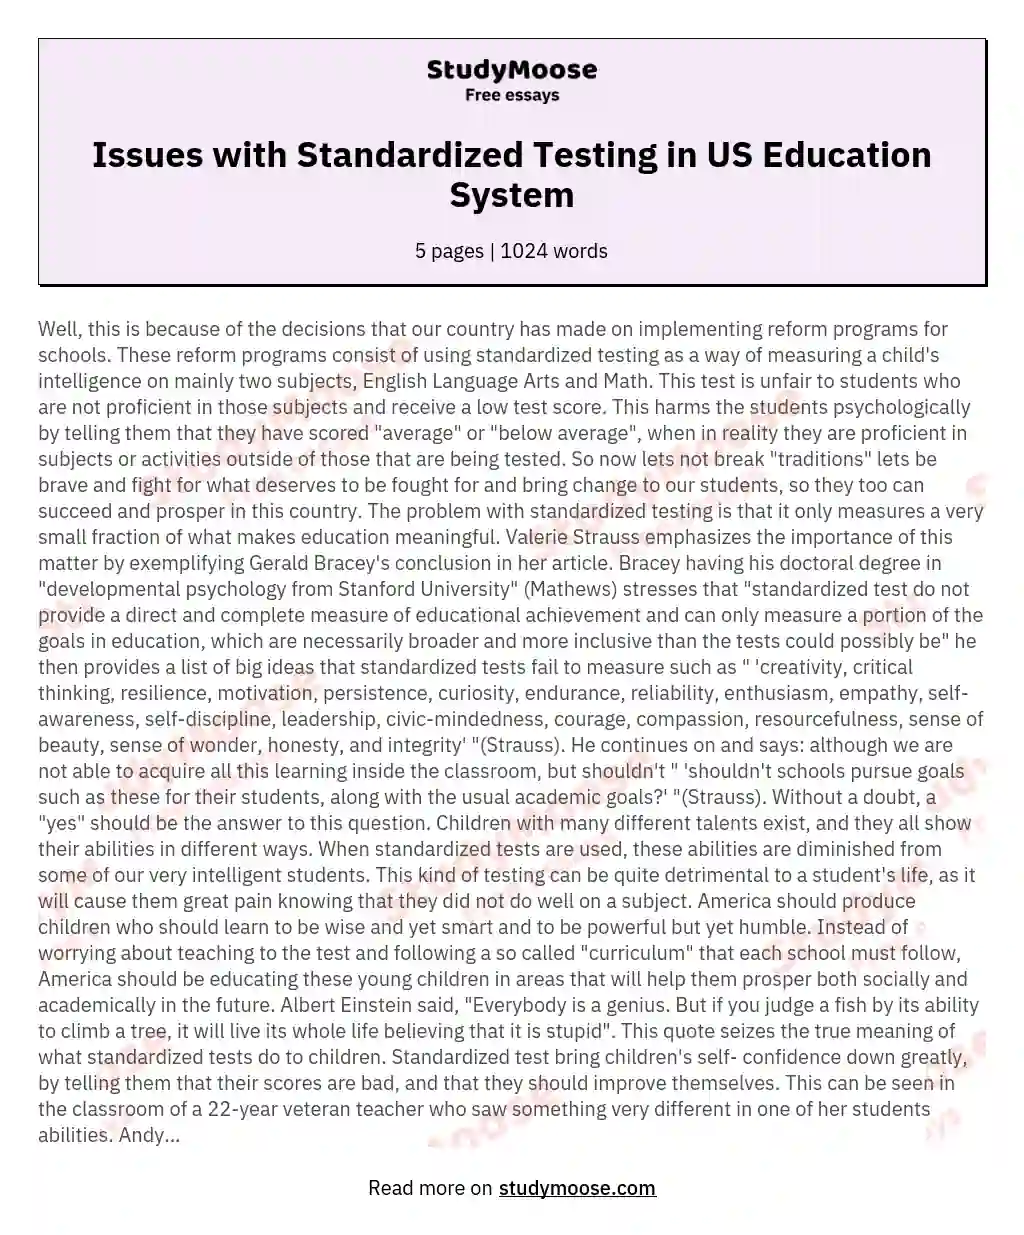 Issues with Standardized Testing in US Education System essay